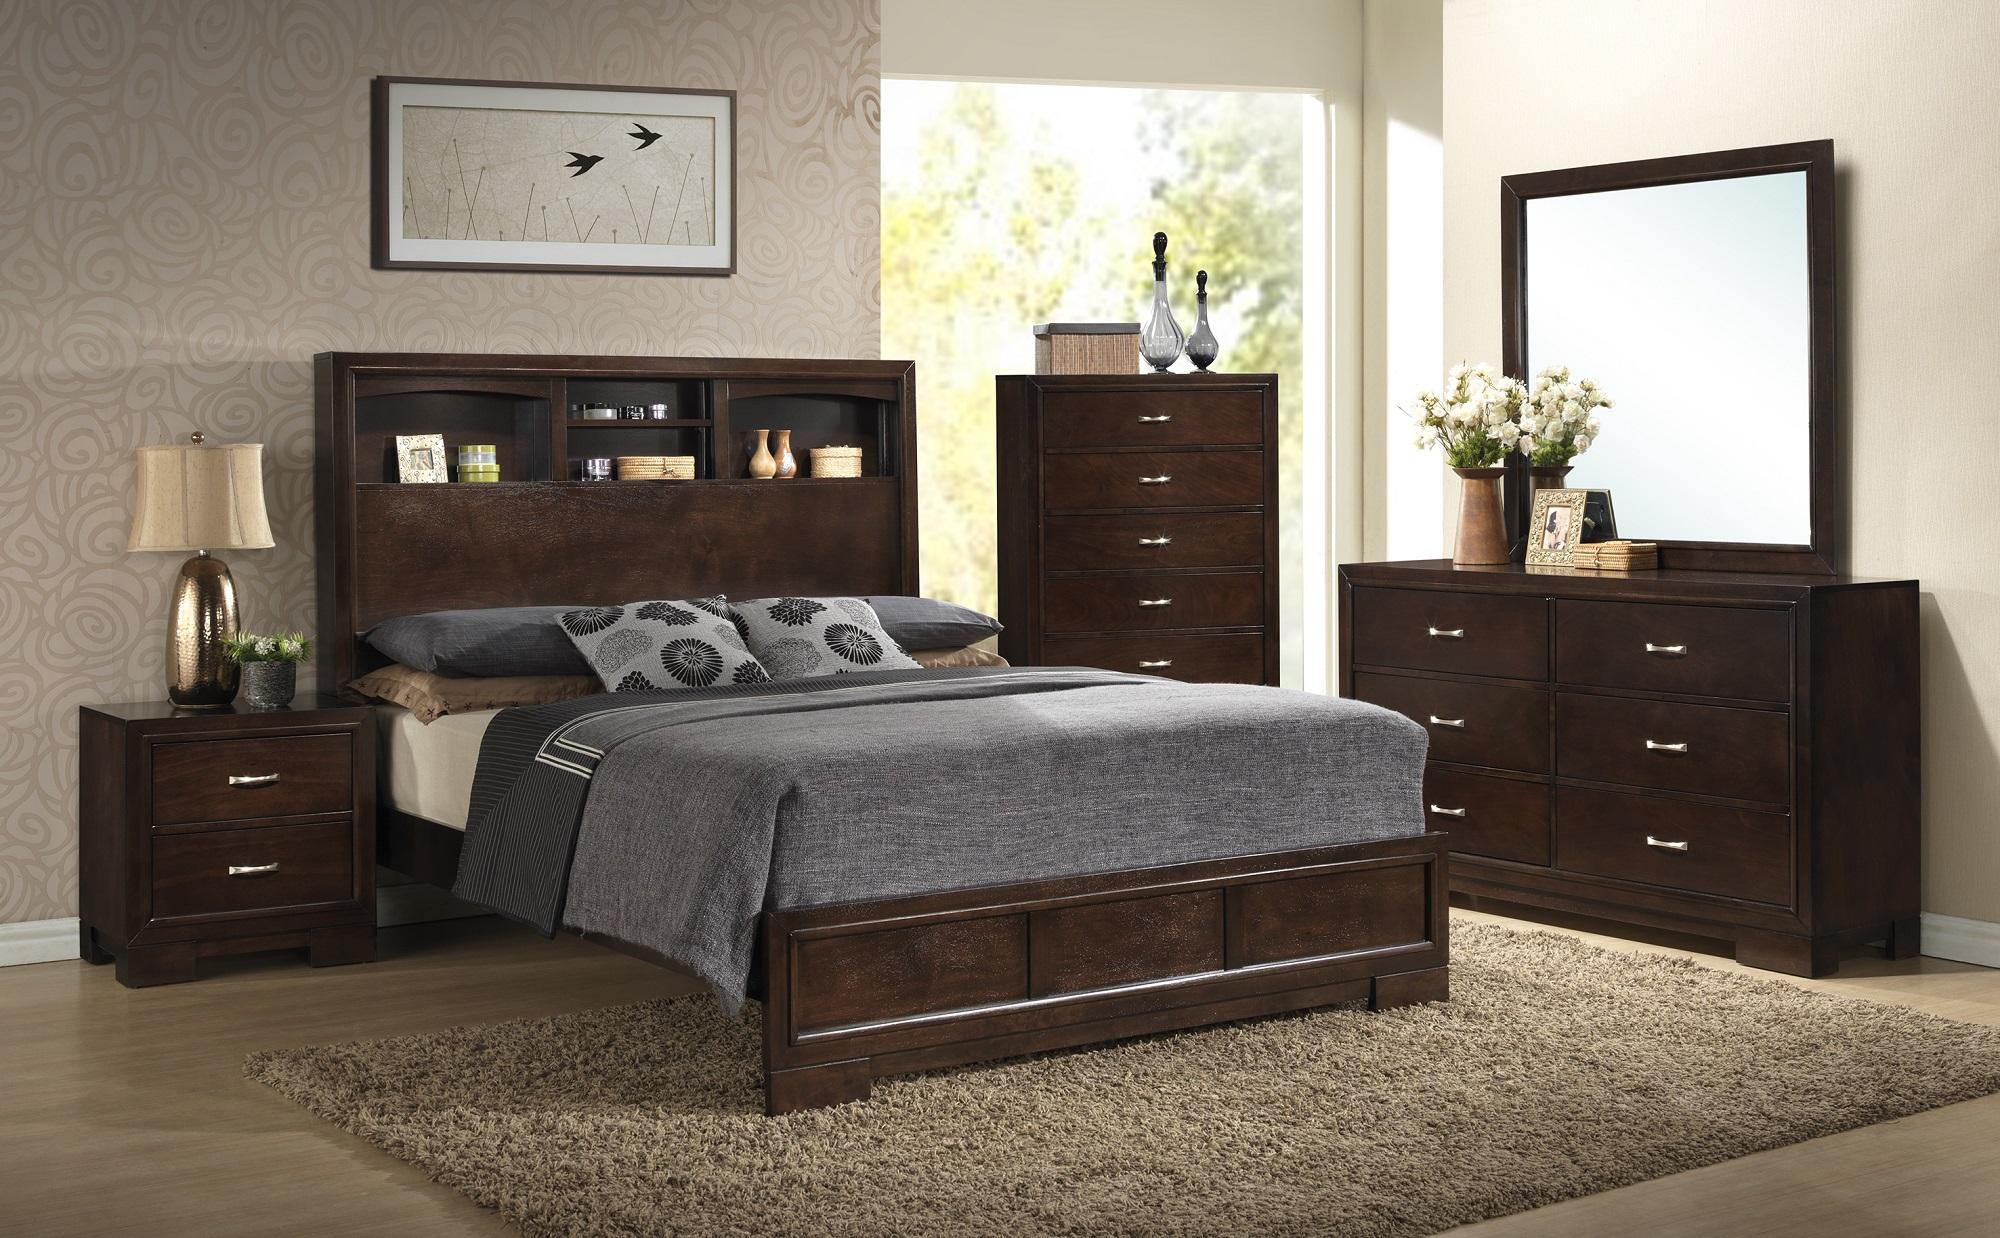 Bookie 4233 Lifestyle Royal Furniture Lifestyle Bookie Dealer pertaining to sizing 2000 X 1238